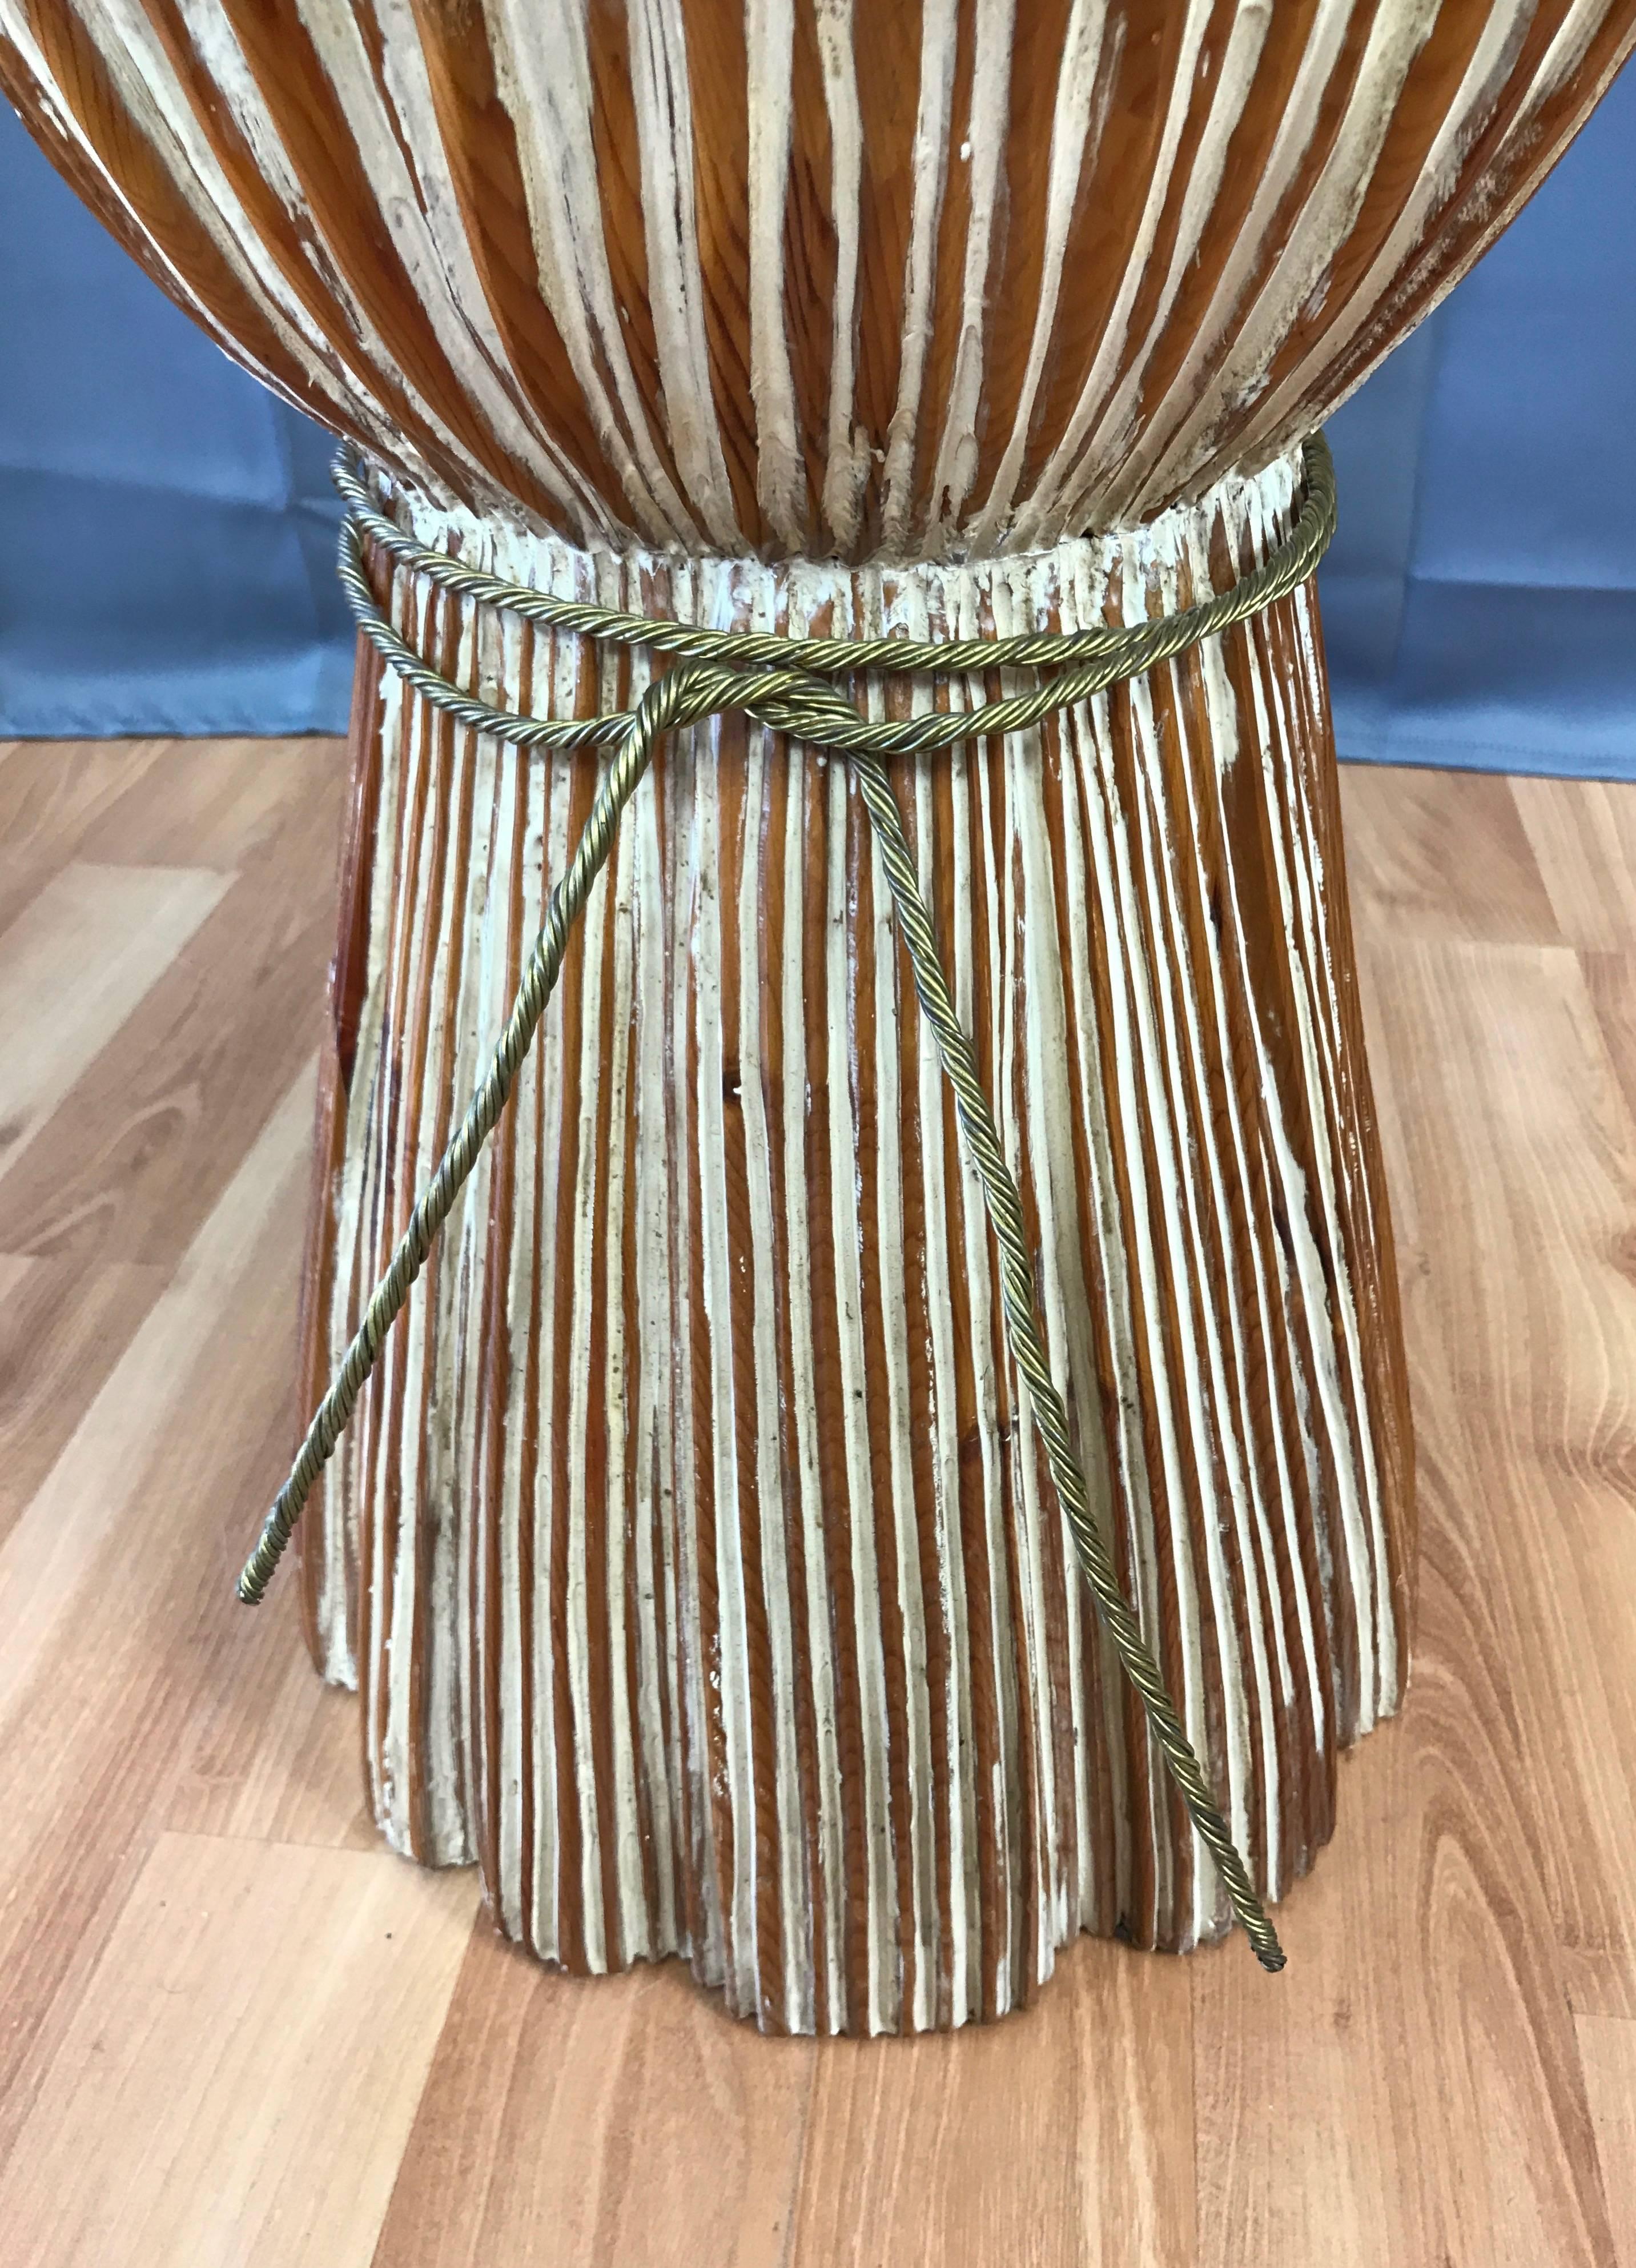 Sculptural Carved Wood Wheat Sheaf Table with Glass Top For Sale 1